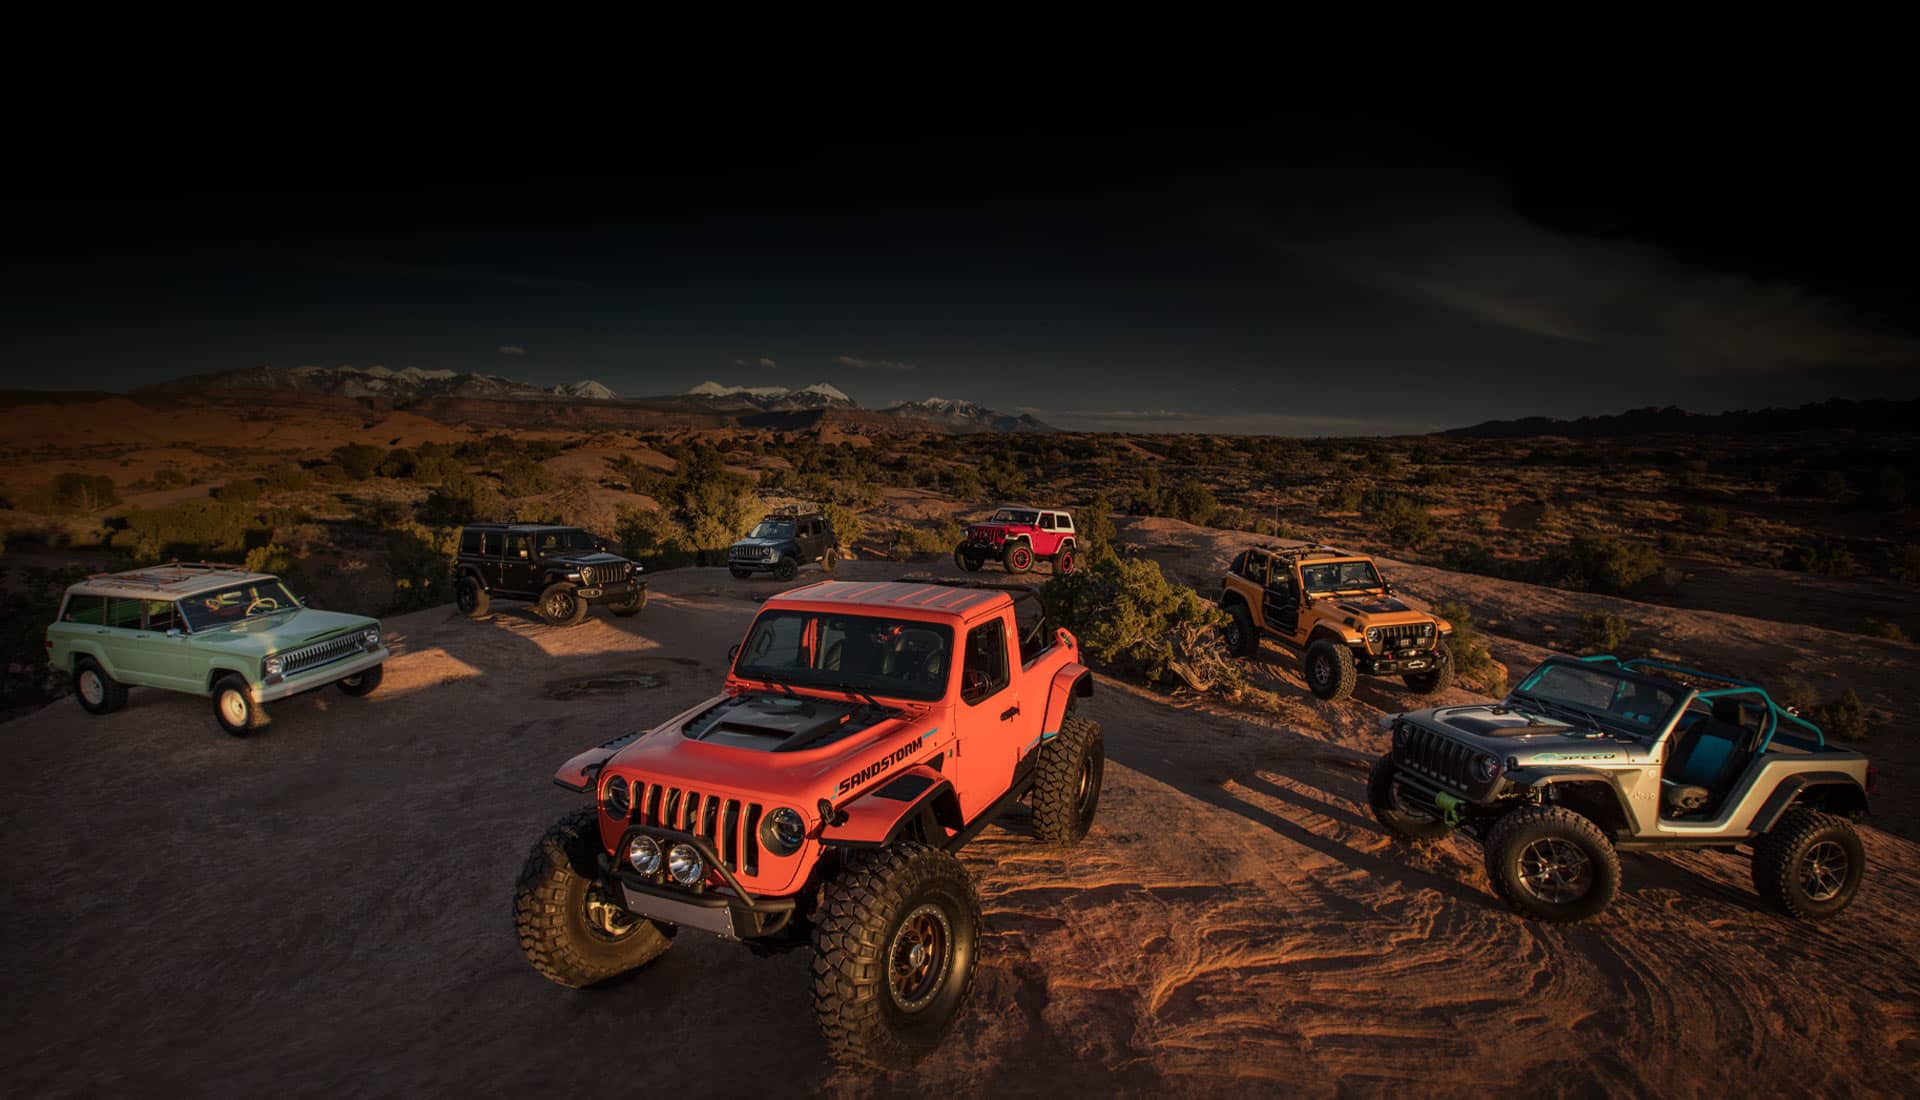 A combination of seven Jeep Brand concept vehicles—parked on a rocky plateau in the mountains at night, lit by artificial light.